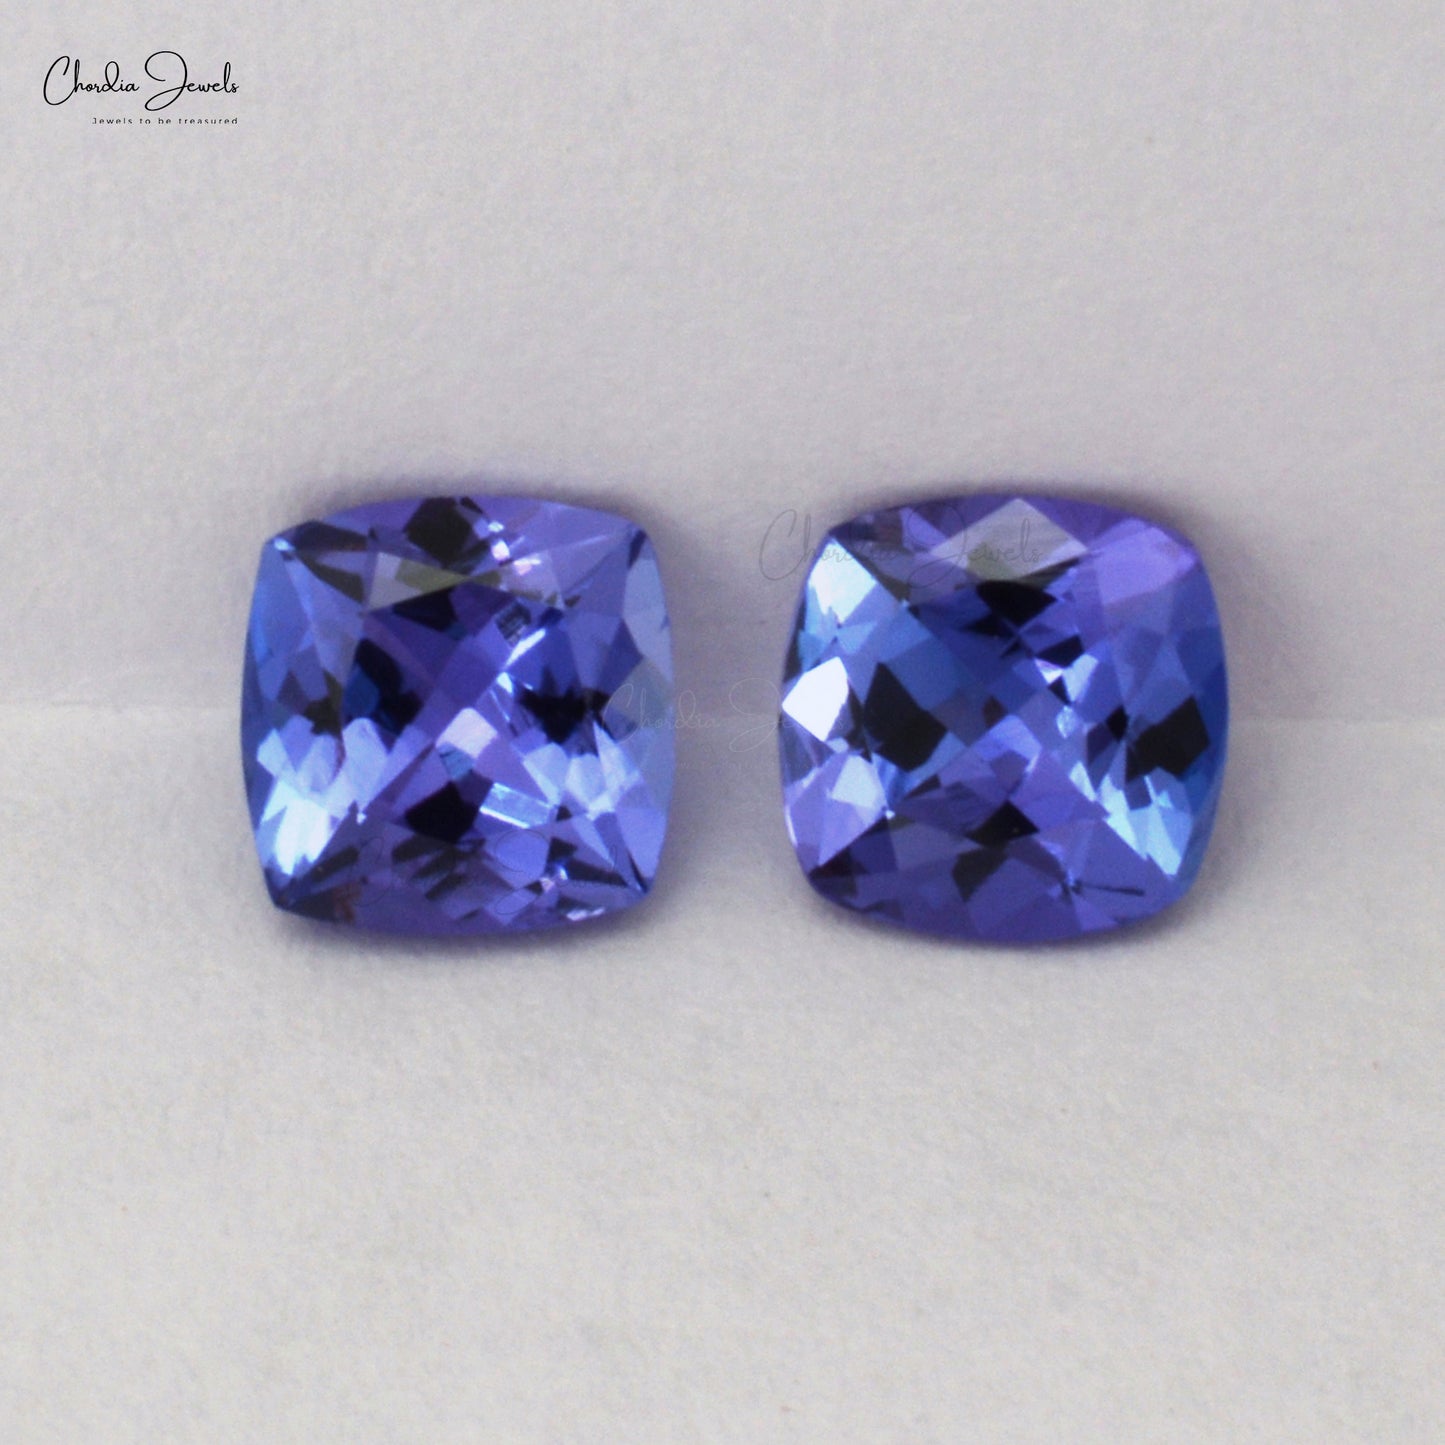 Load image into Gallery viewer, Natural Tanzanite Square Cushion Cut 6X6MM Loose Gemstone, 2 Piece
